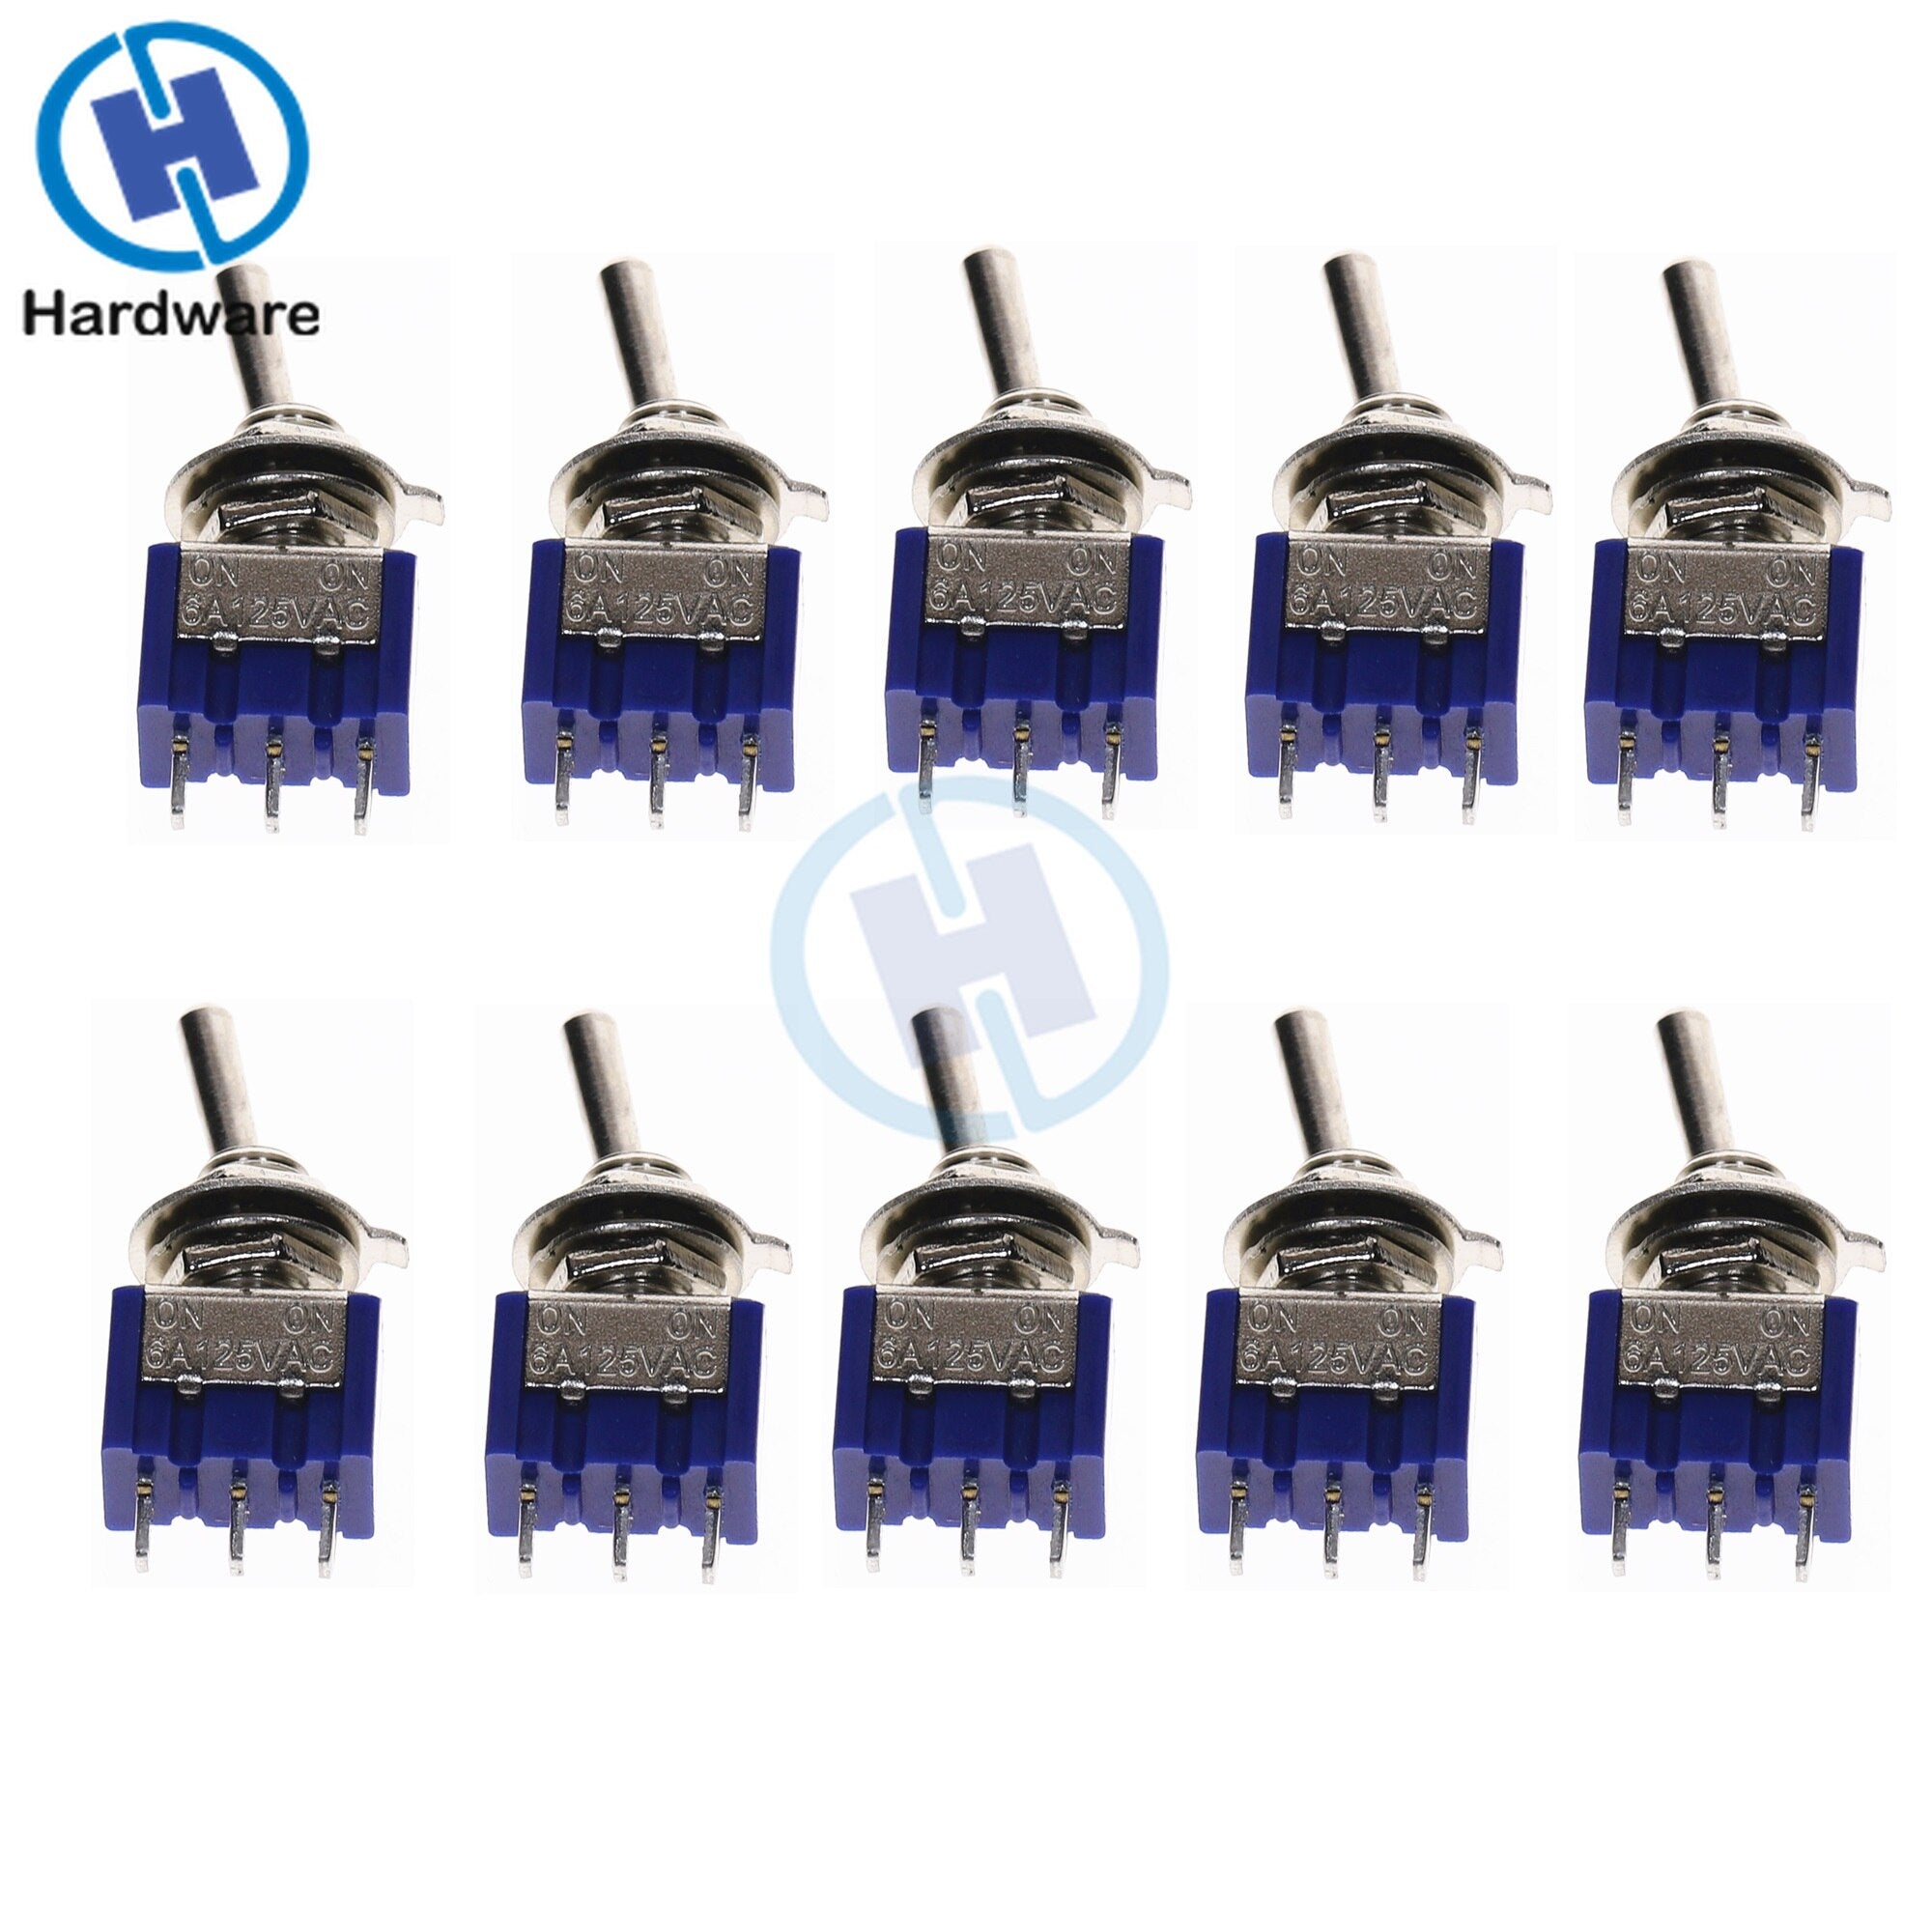 10PC/5PC Miniature Toggle Switch Single Pole Double Throw SPDT DPDT ON-OFF-ON ON-ON 120VAC 6A 1/4 Inch Mounting MTS-102 103 202